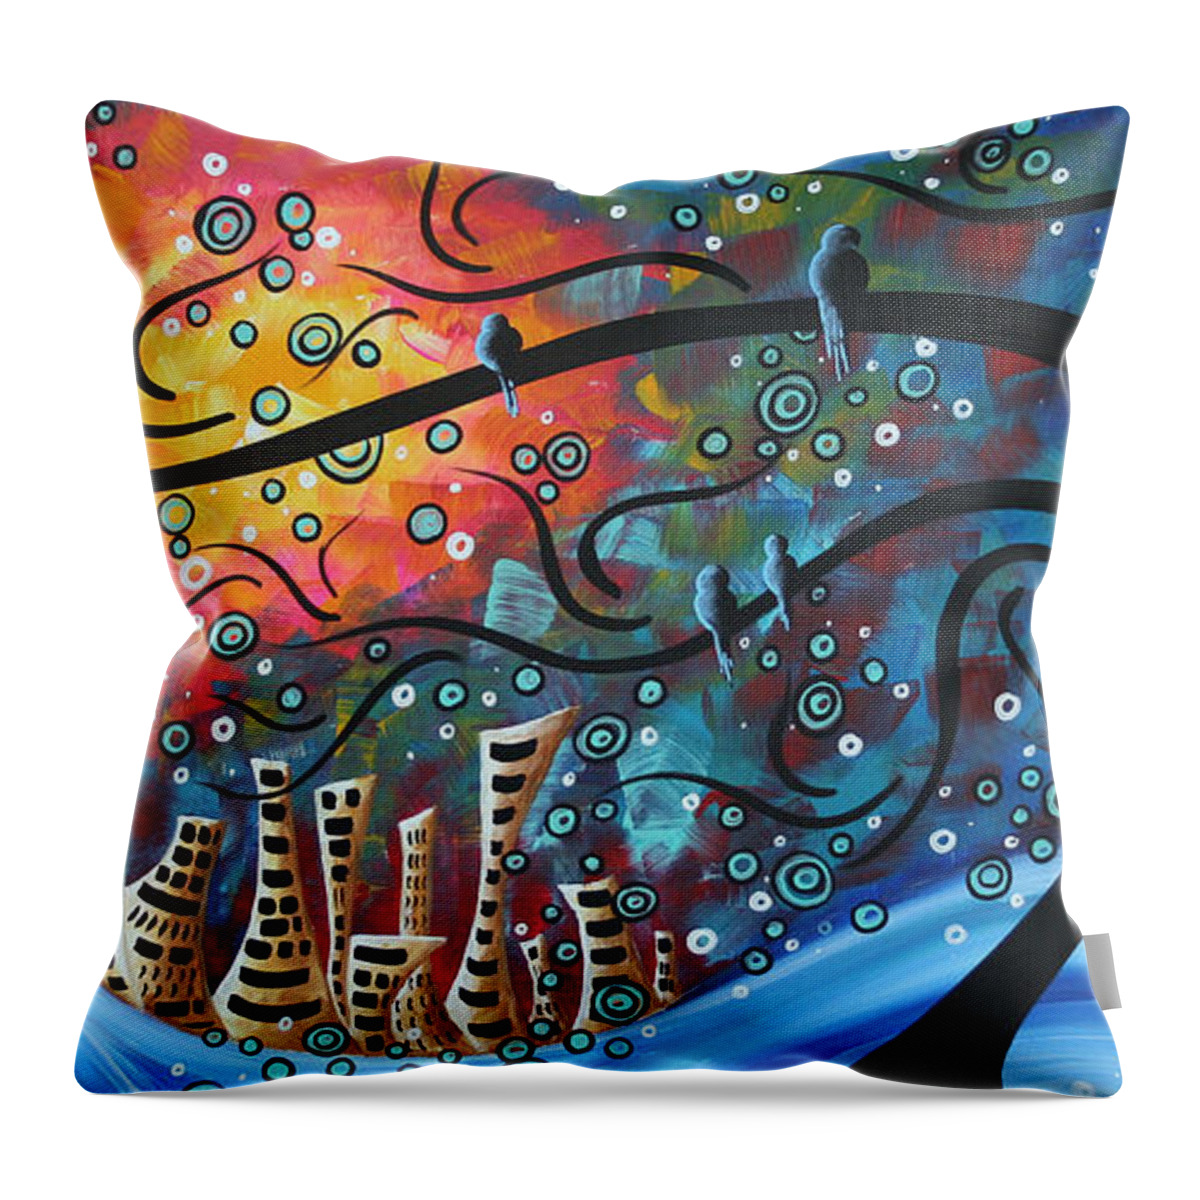 Art Throw Pillow featuring the painting City by the Sea by MADART by Megan Aroon